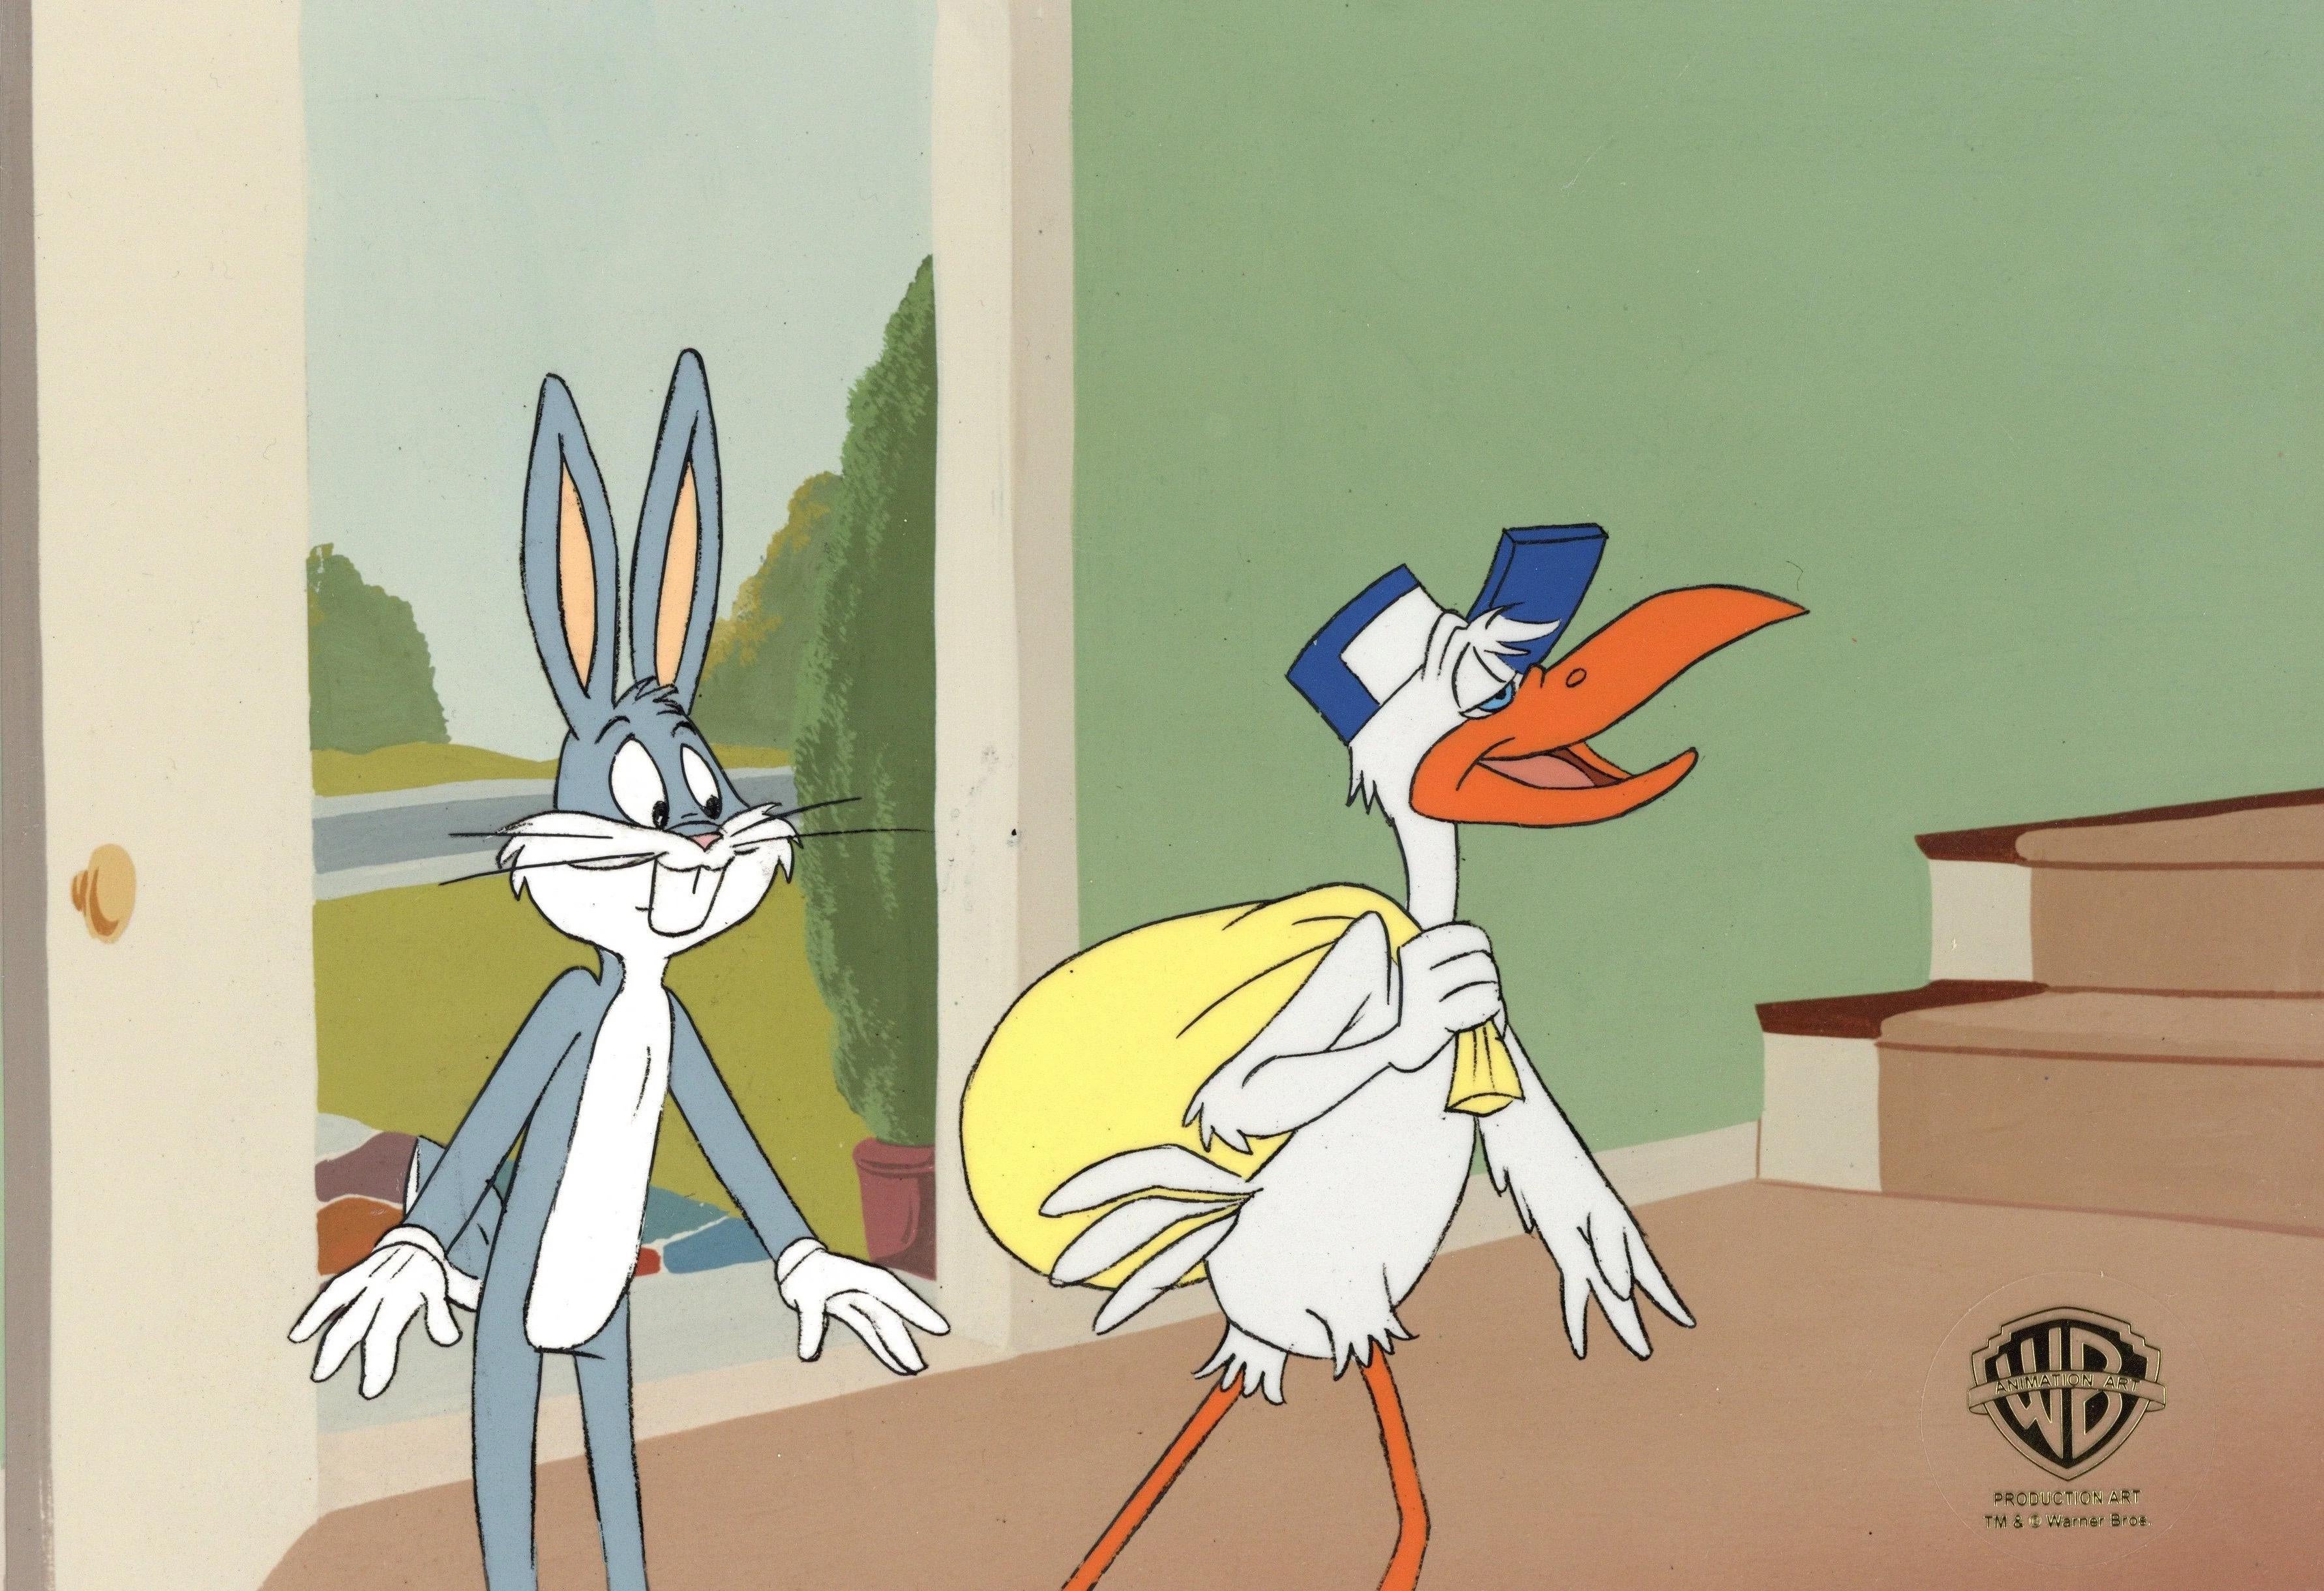 Looney Tunes Original Production Cel: Bugs Bunny and Drunk Stork - Art by Darrell Van Citters